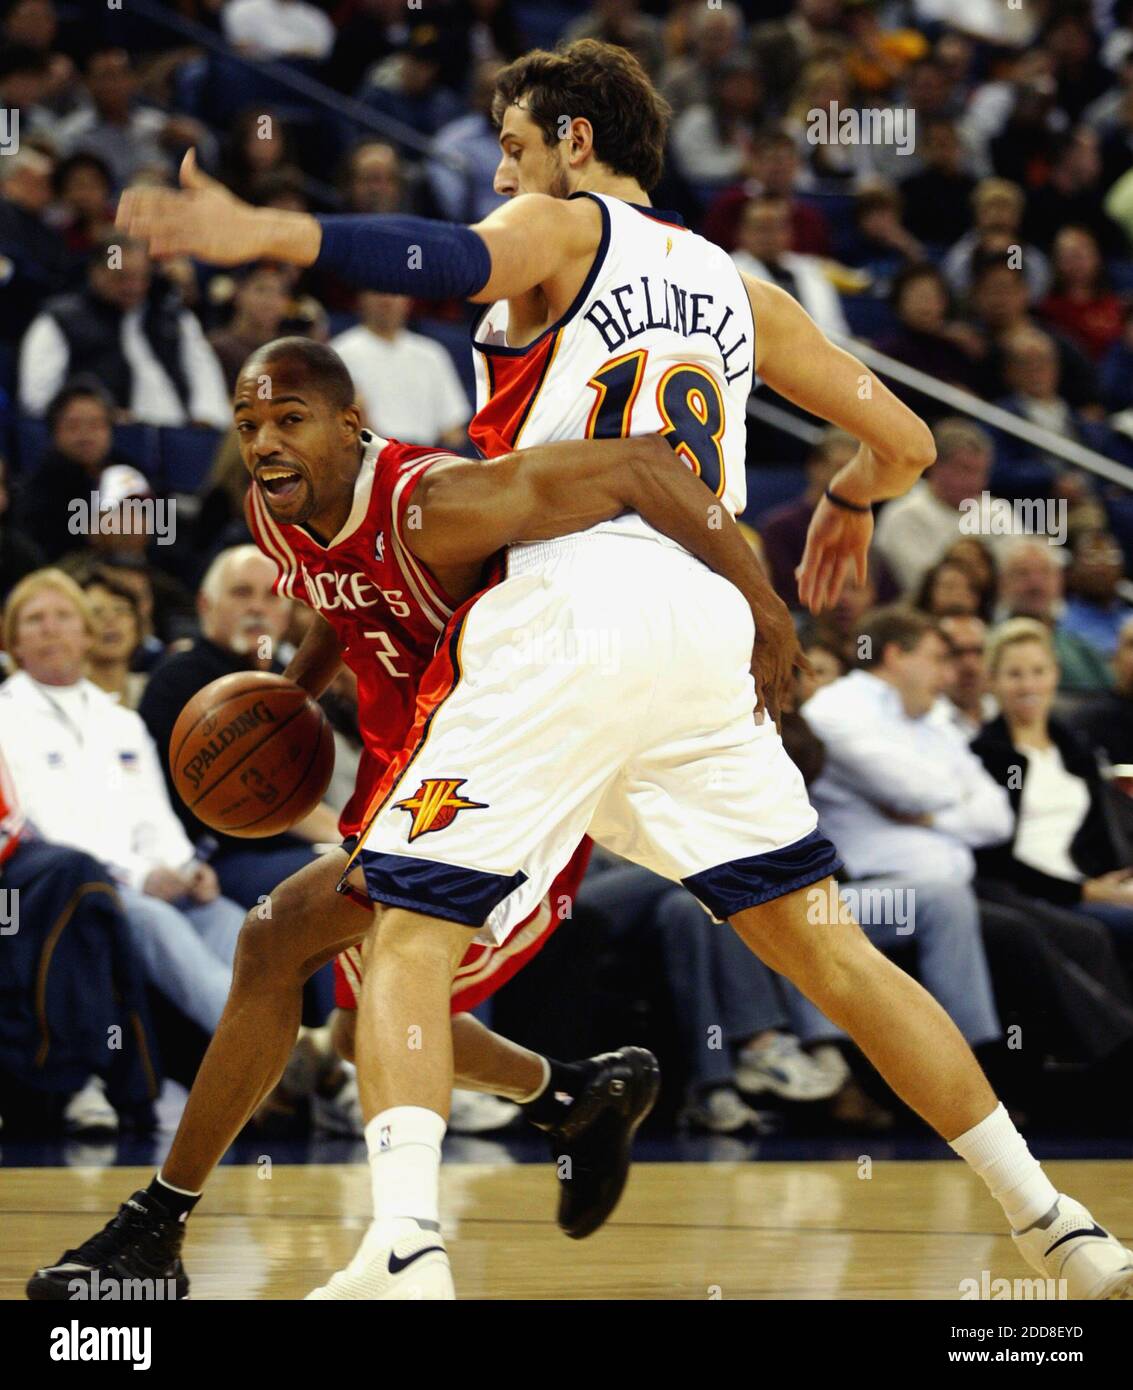 NO FILM, NO VIDEO, NO TV, NO DOCUMENTARY - The Houston Rockets' Rafer Alston (left) drives the ball against the Golden State Warriors' Marco Belinelli (18) in the first quarter at Oracle Arena in Oakland, CA, USA on December 12, 2008. Photo by Anda Chu/Oakland Tribune/MCT/Cameleon/ABACAPRESS.COM Stock Photo